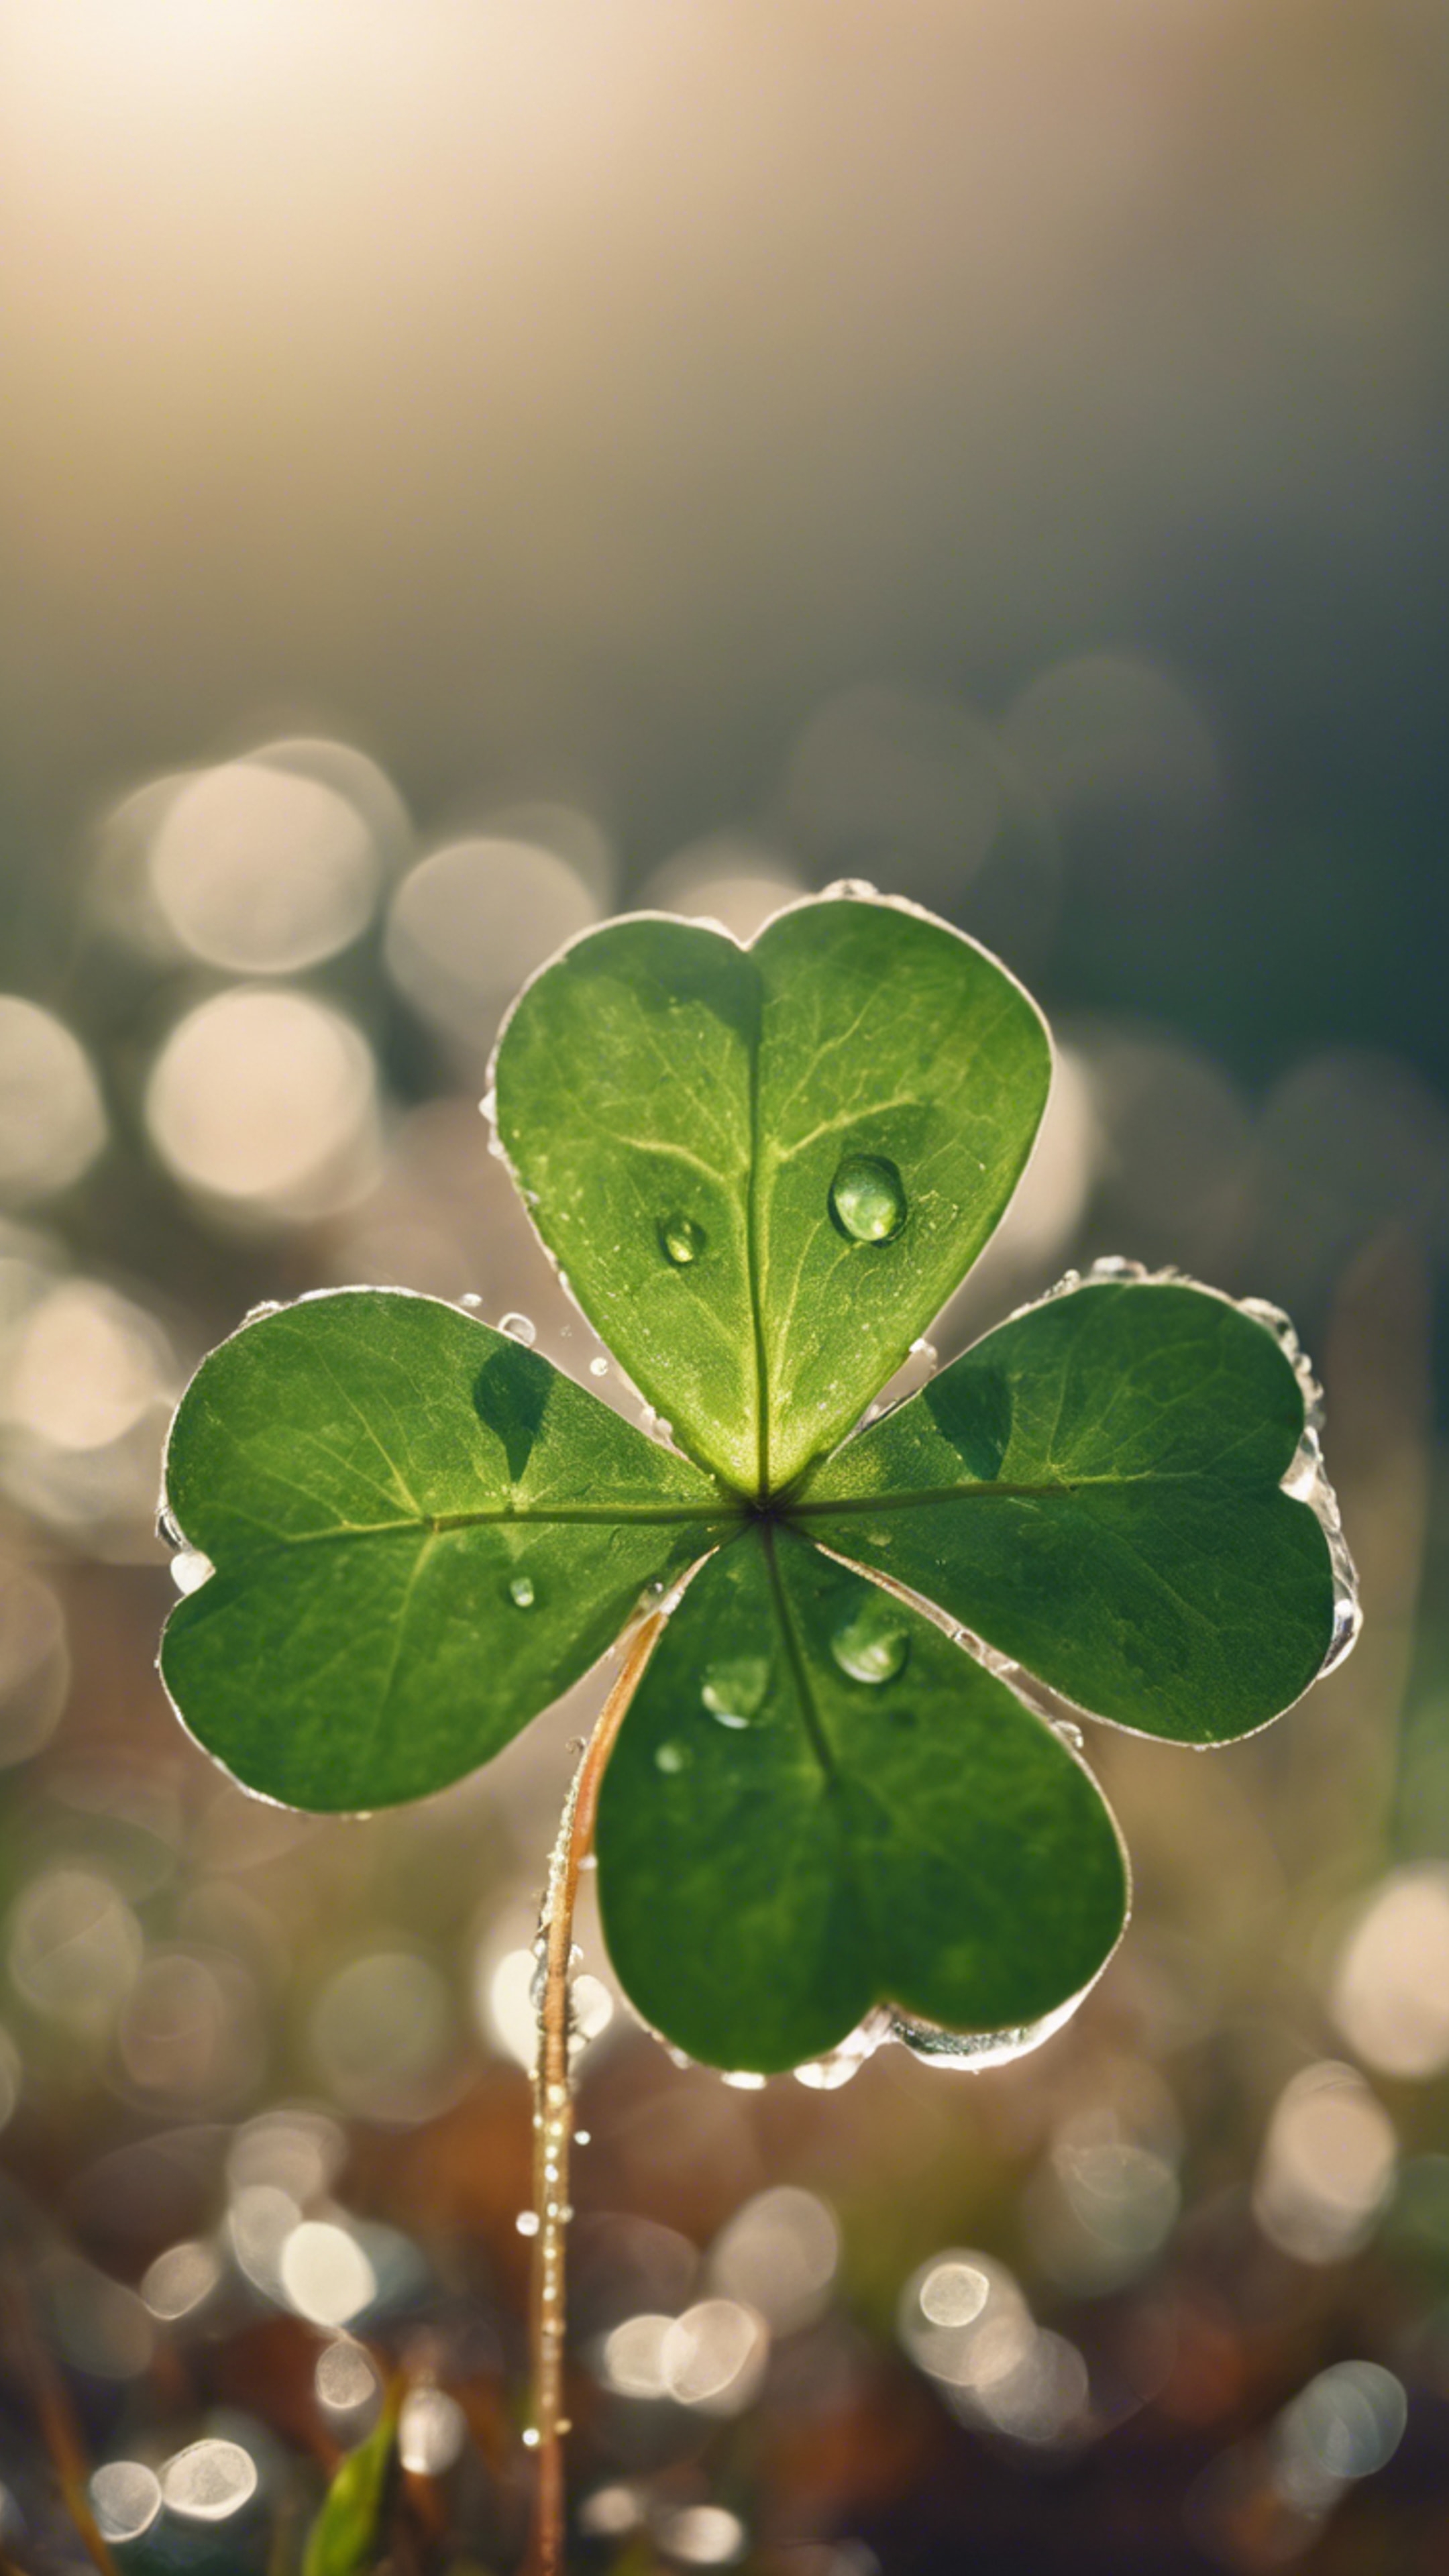 A close-up view of a four leaf clover gleaming in the morning dew. טפט[b8d84a1222284df192e8]